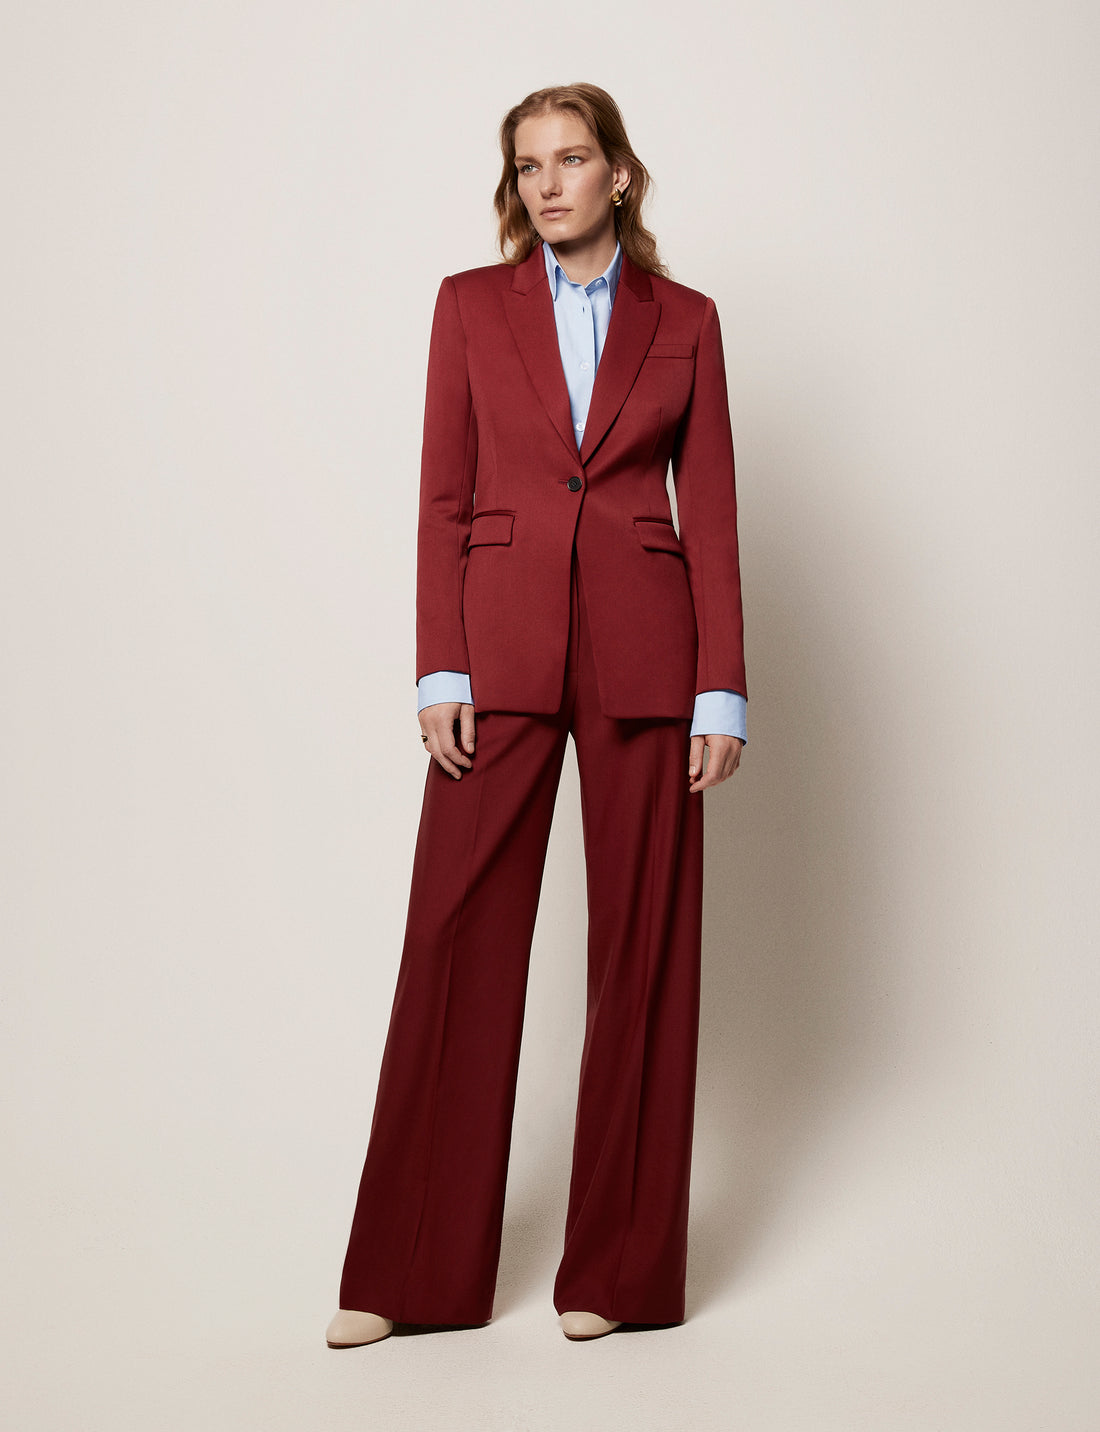 Single Button Suit Jacket, Blazer for Ladies, Shop Today. Get it Tomorrow!